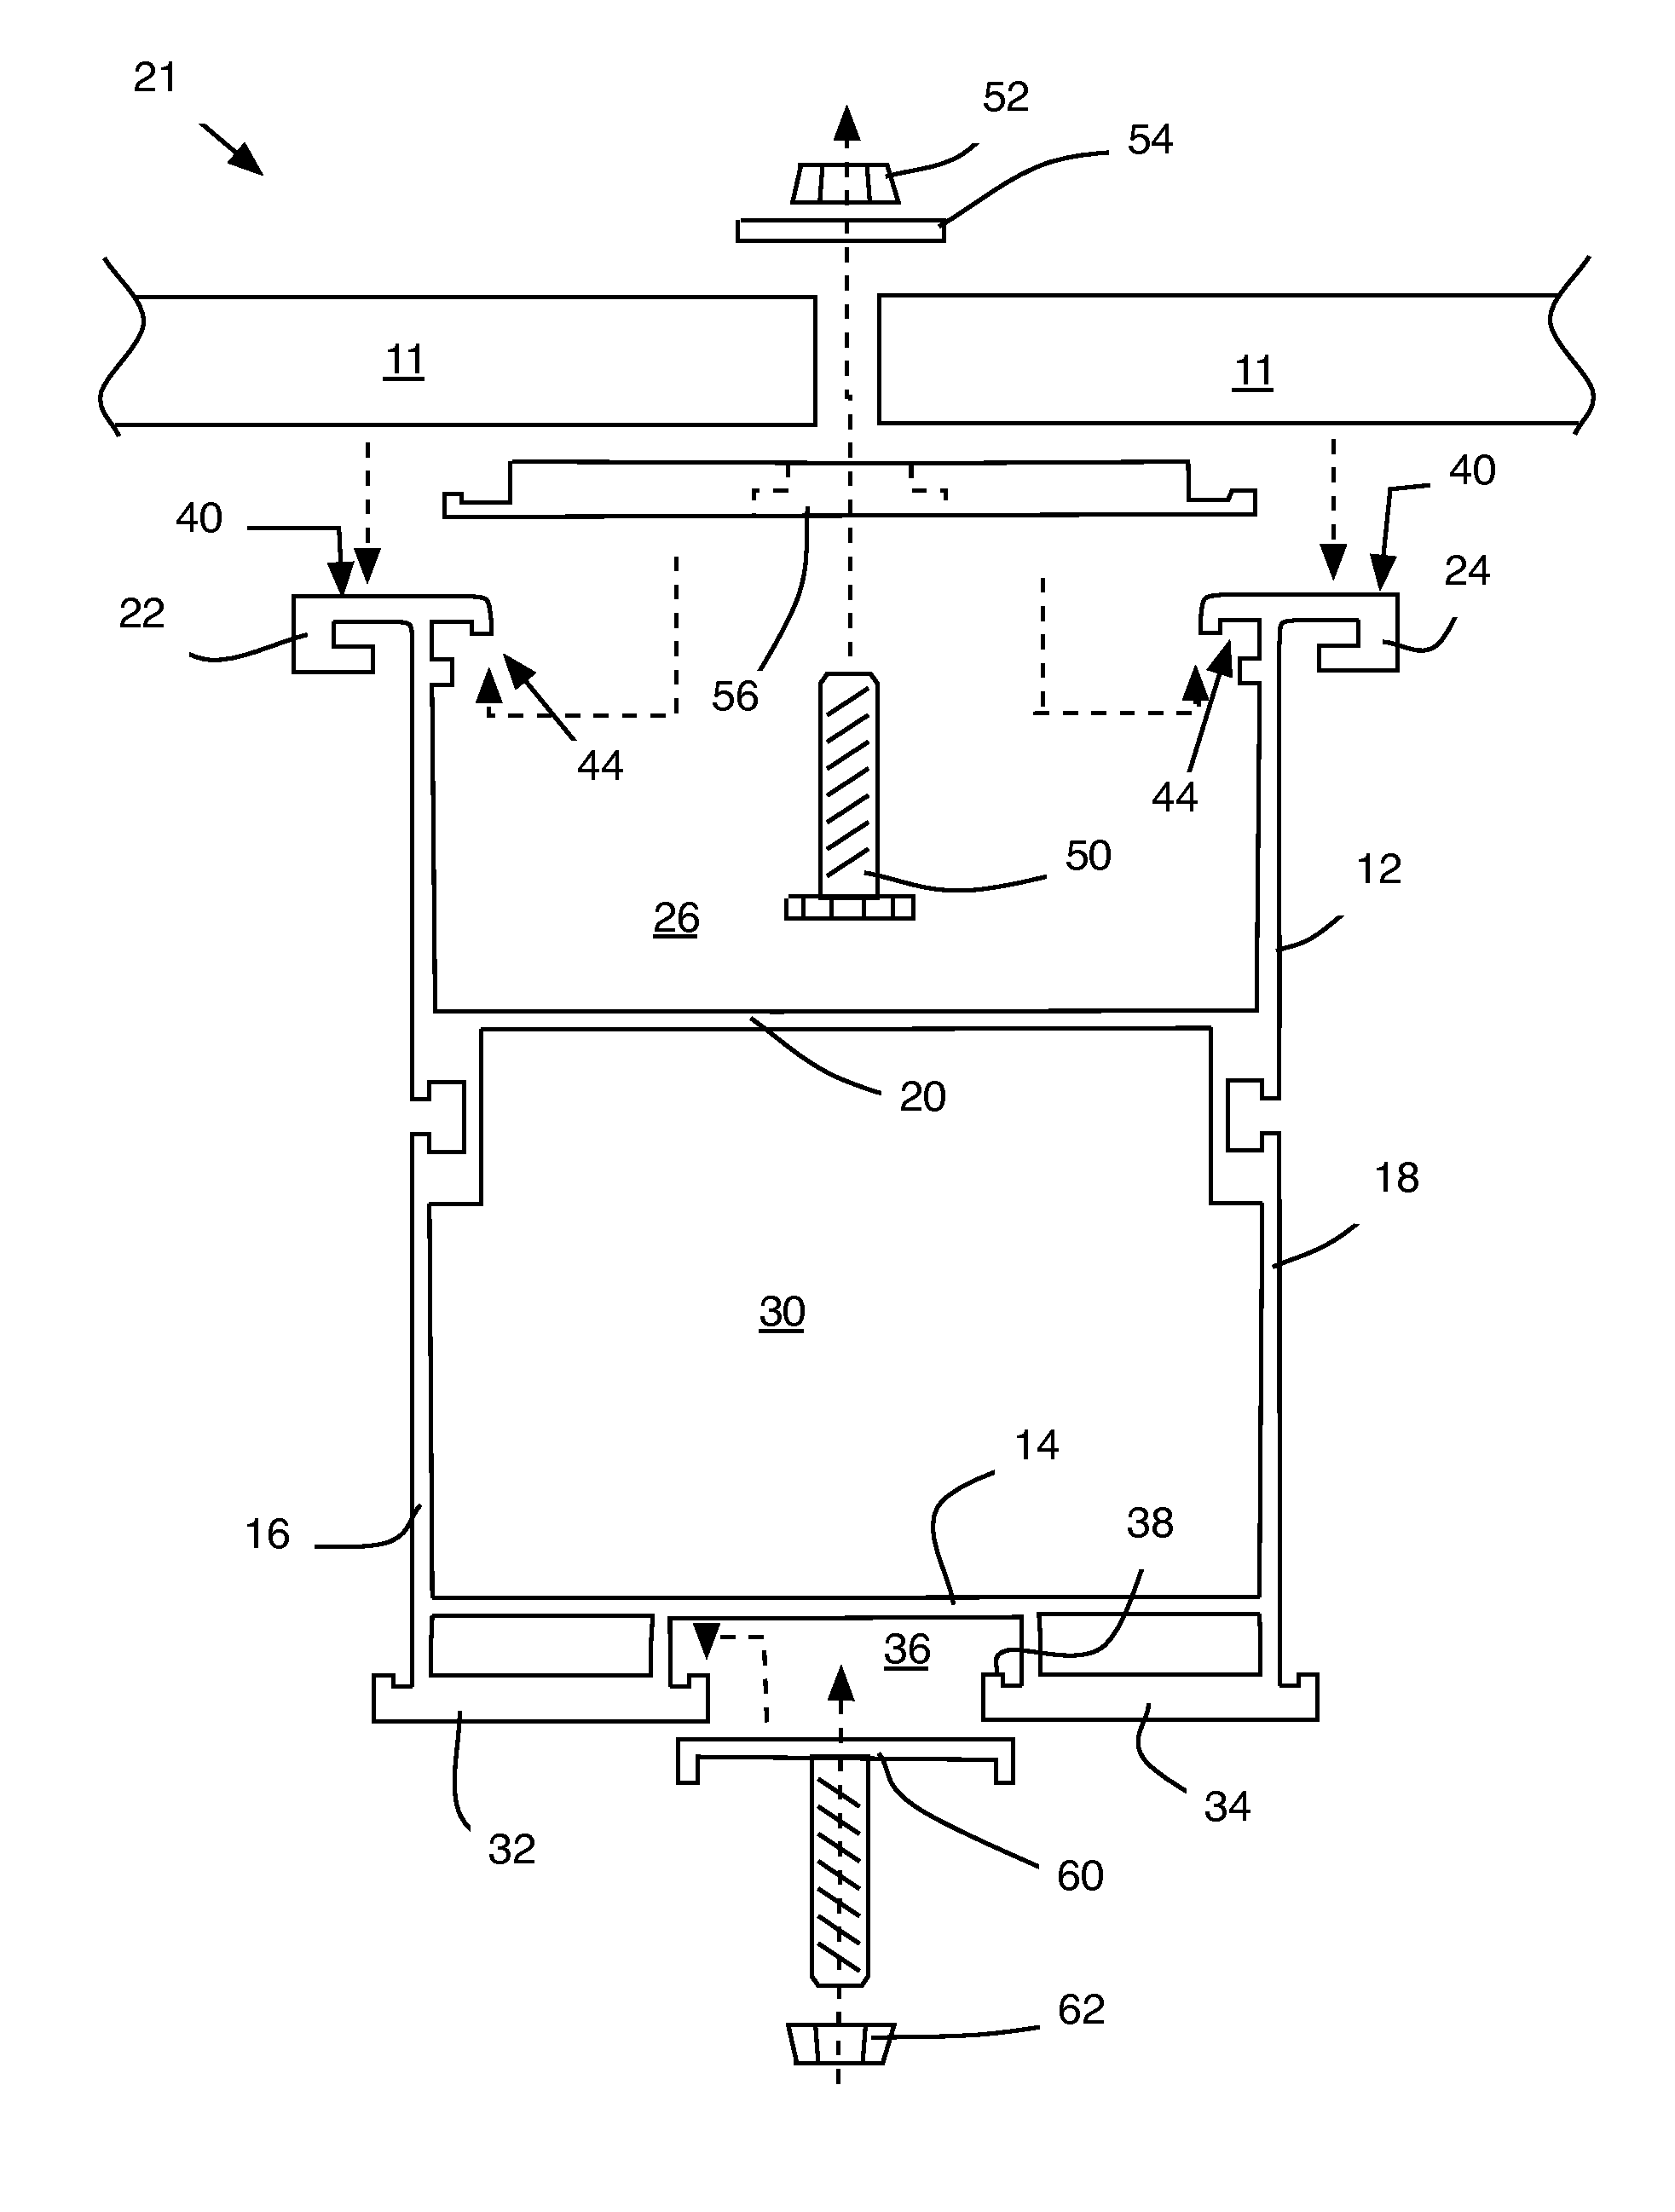 Building integrated solar array support structure device, system, and method